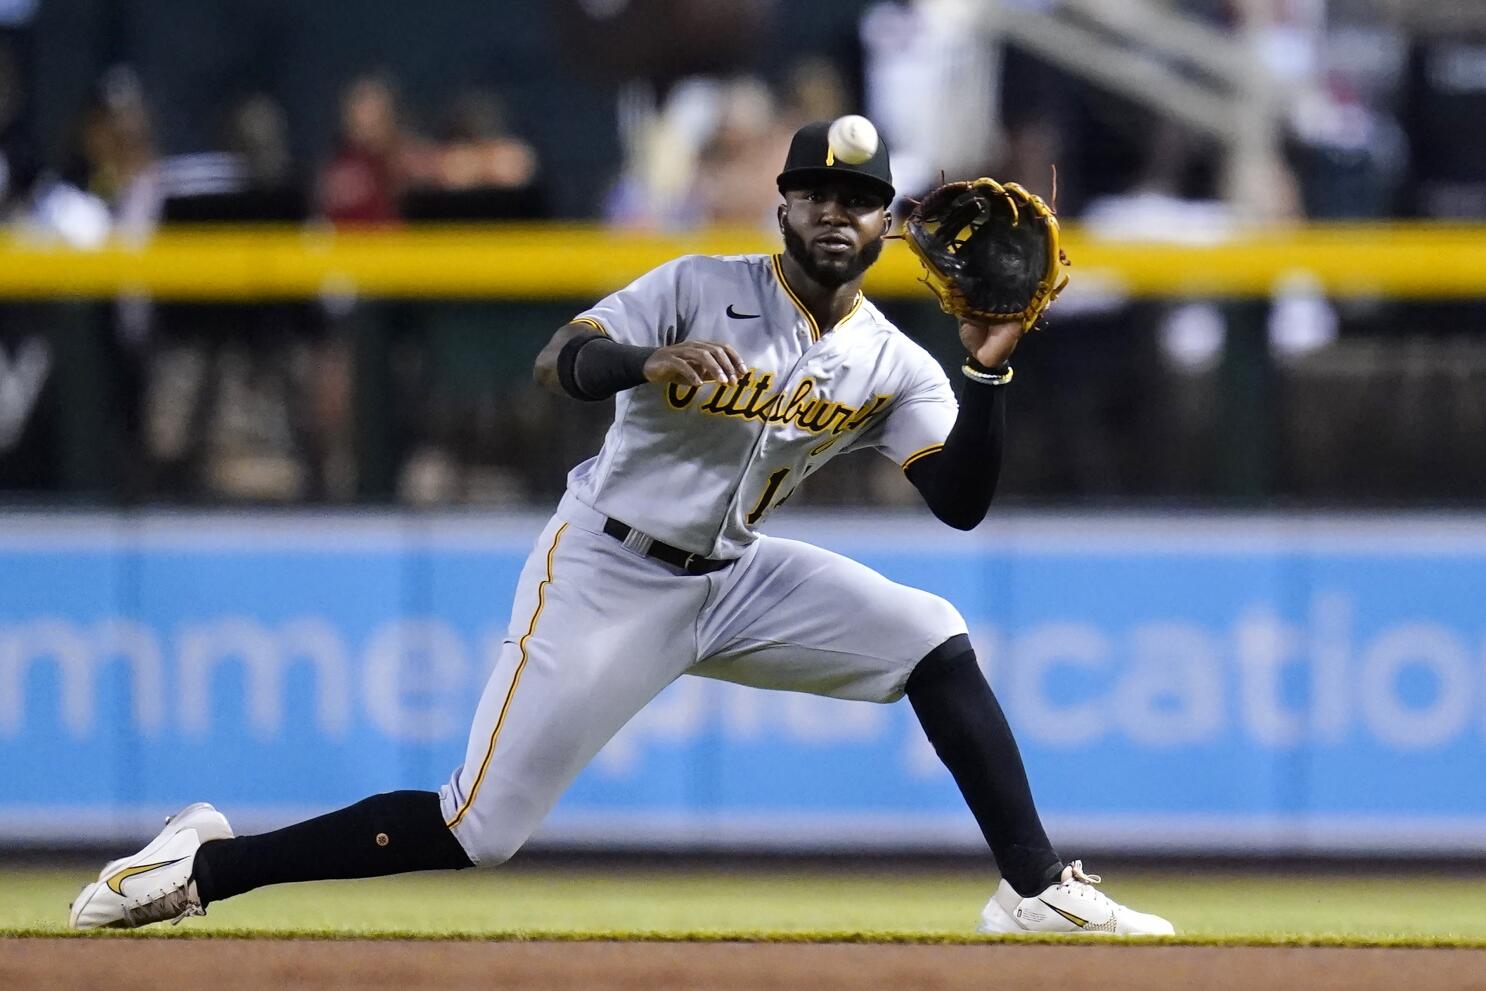 Ke'Bryan Hayes Heats Up With The Bat, Hoping To End Pittsburgh